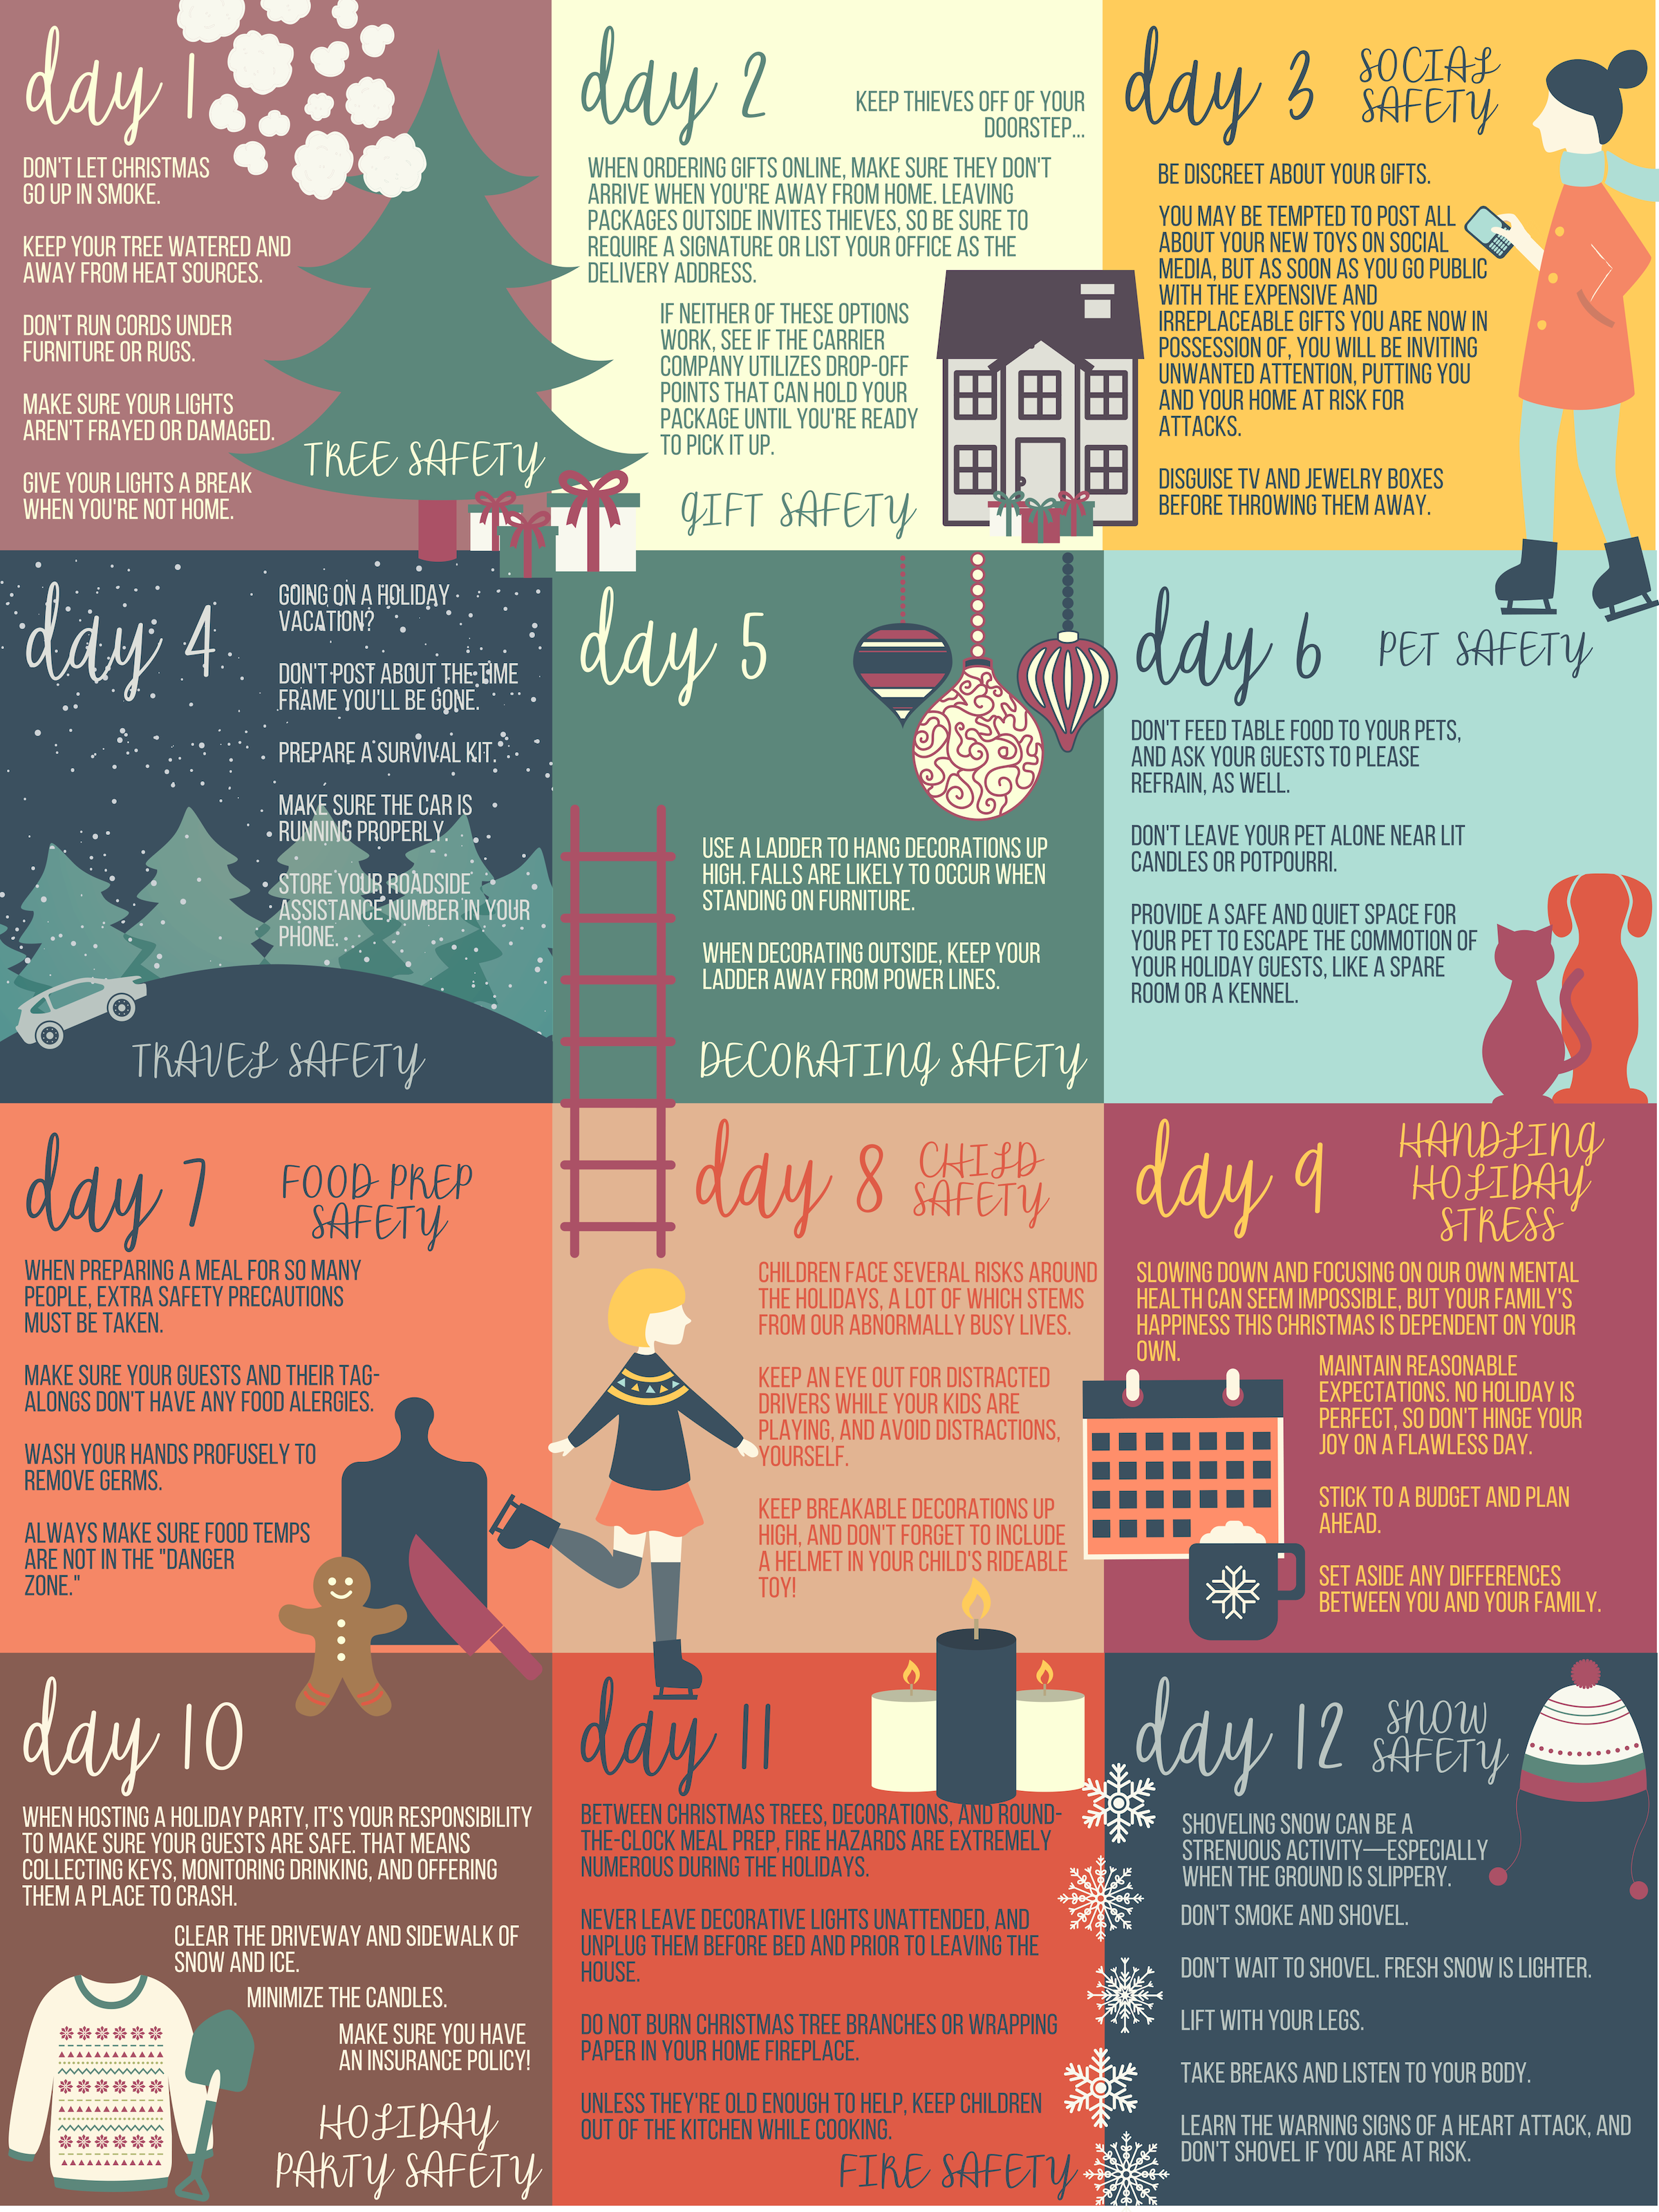 12 Days of Safety Infographic